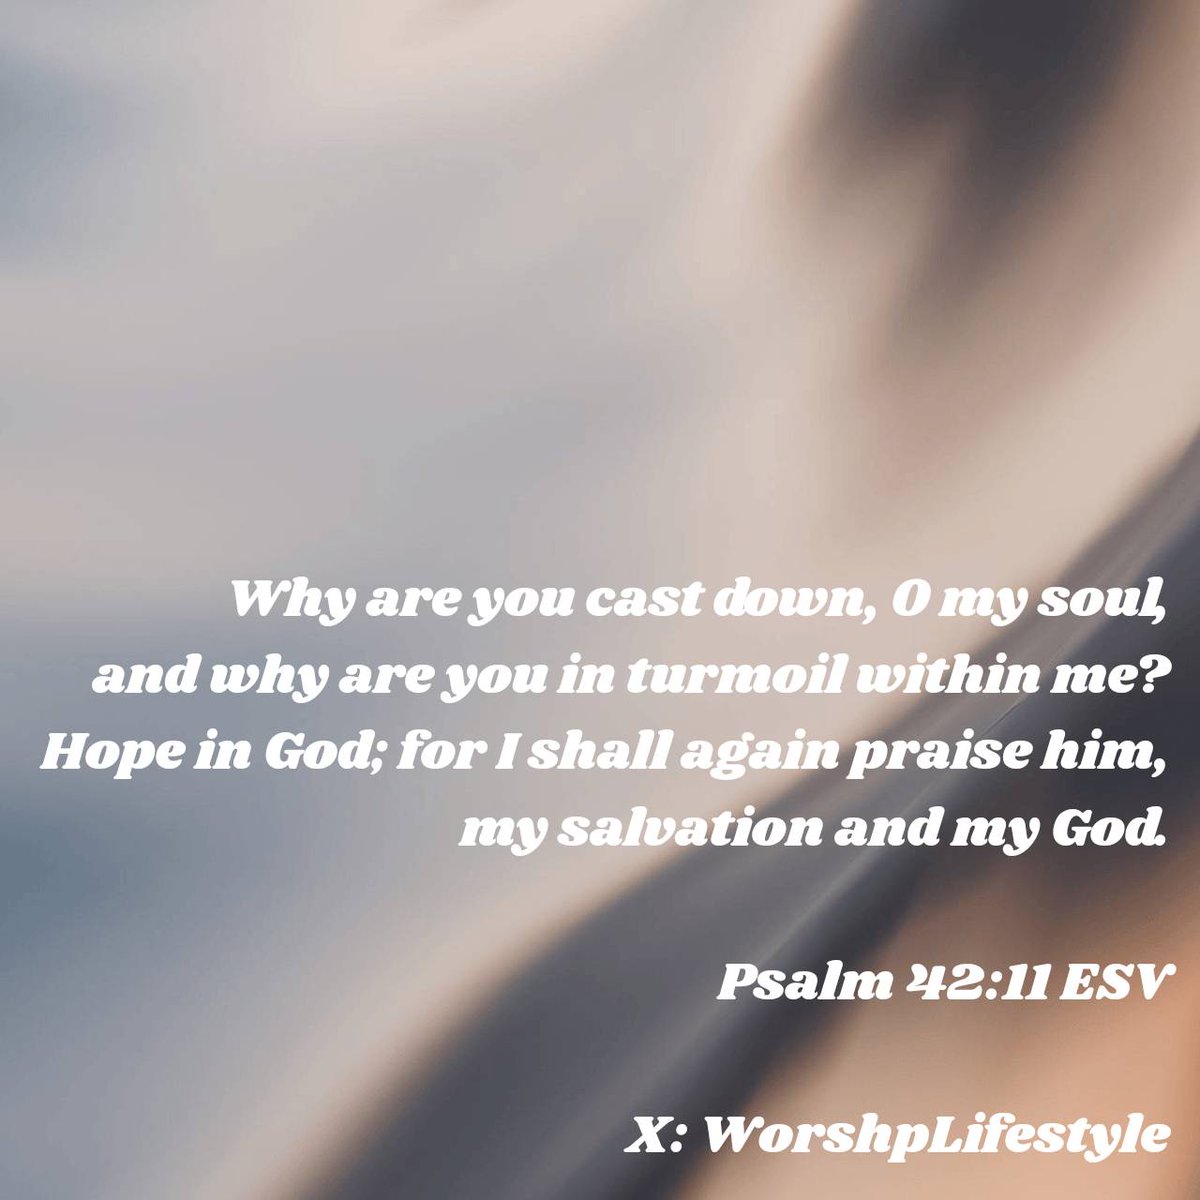 Psalm 42:11 ESV
Why are you cast down, O my soul, and why are you in turmoil within me? Hope in God; for I shall again praise him, my salvation and my God.

bible.com/bible/59/psa.4…
#VerseOfTheDay #BibleVerse #WorshpLifestyle #WorshipLifestyle